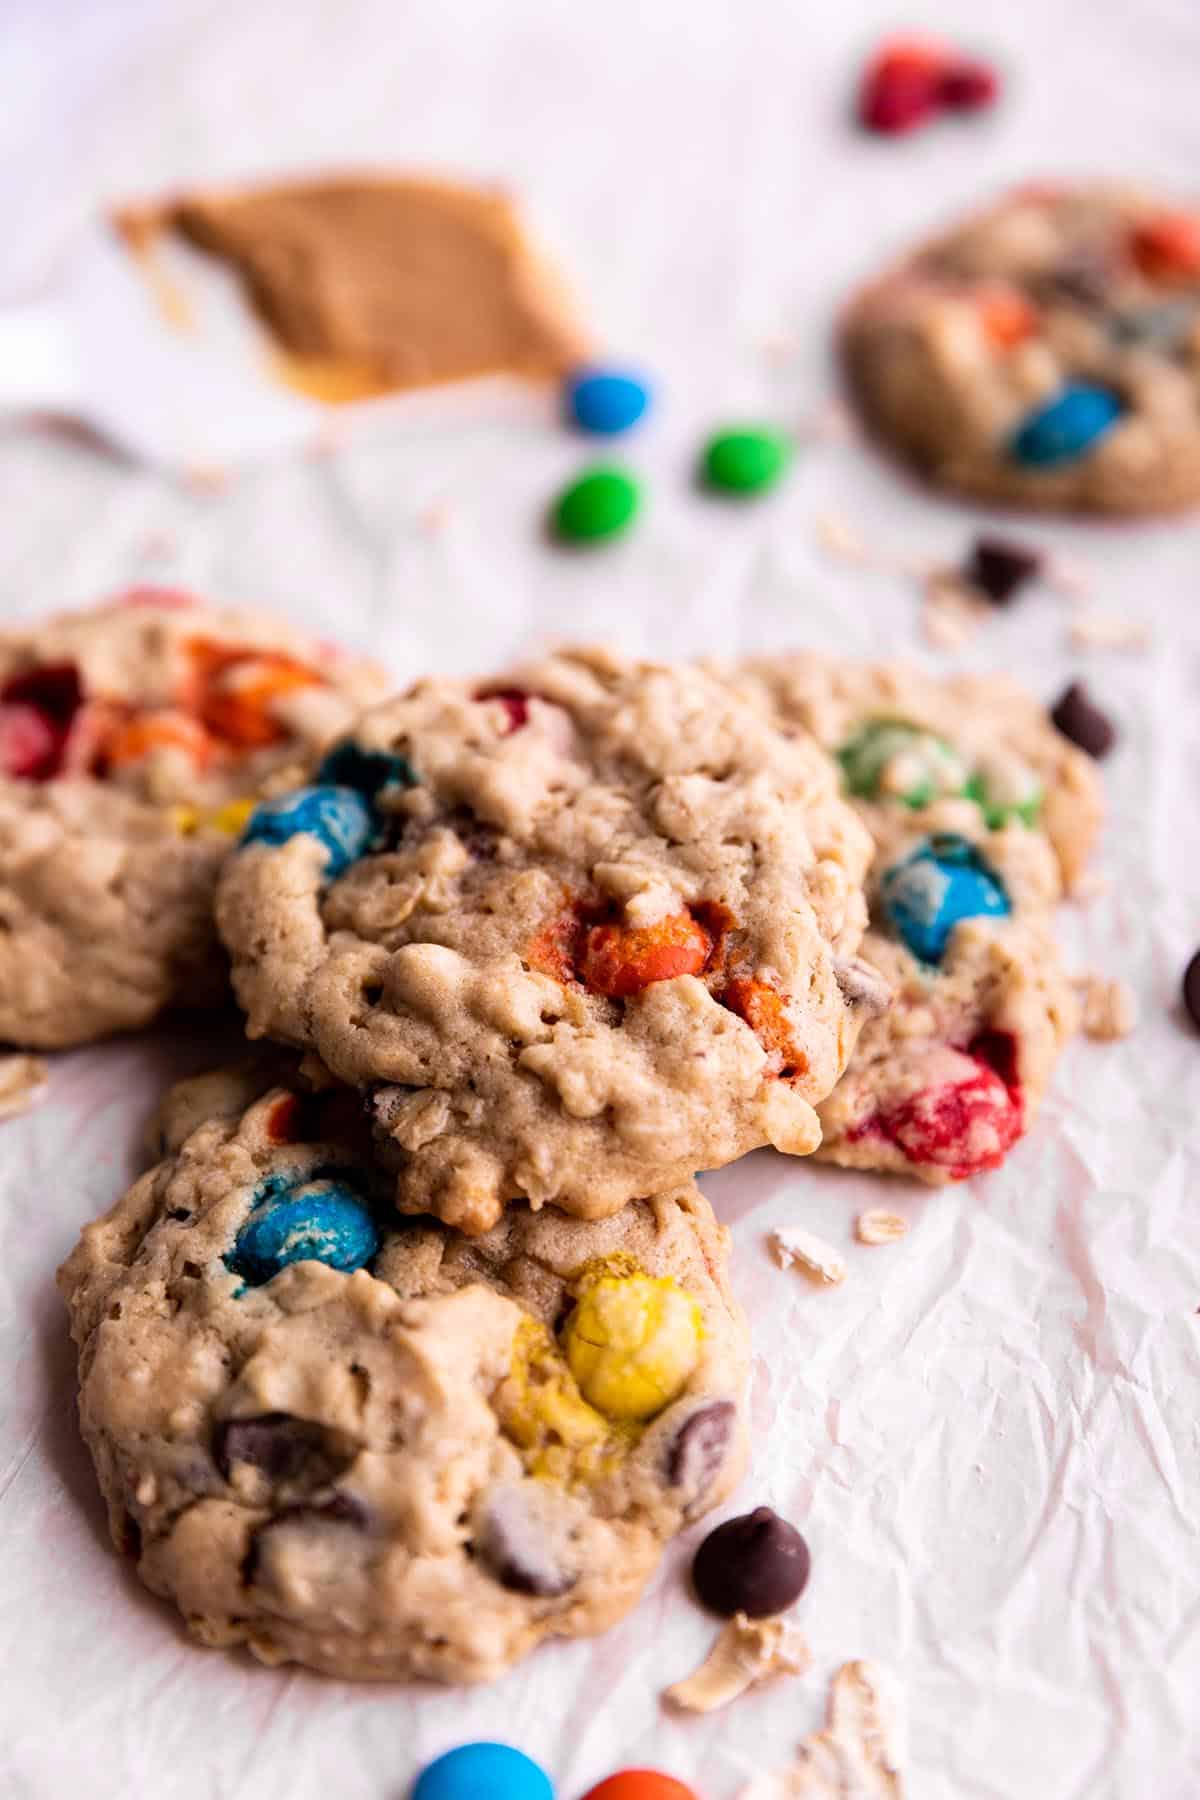 Cookies stacked on each other with M&M's, Oatmeal and a spatula with peanut butter.